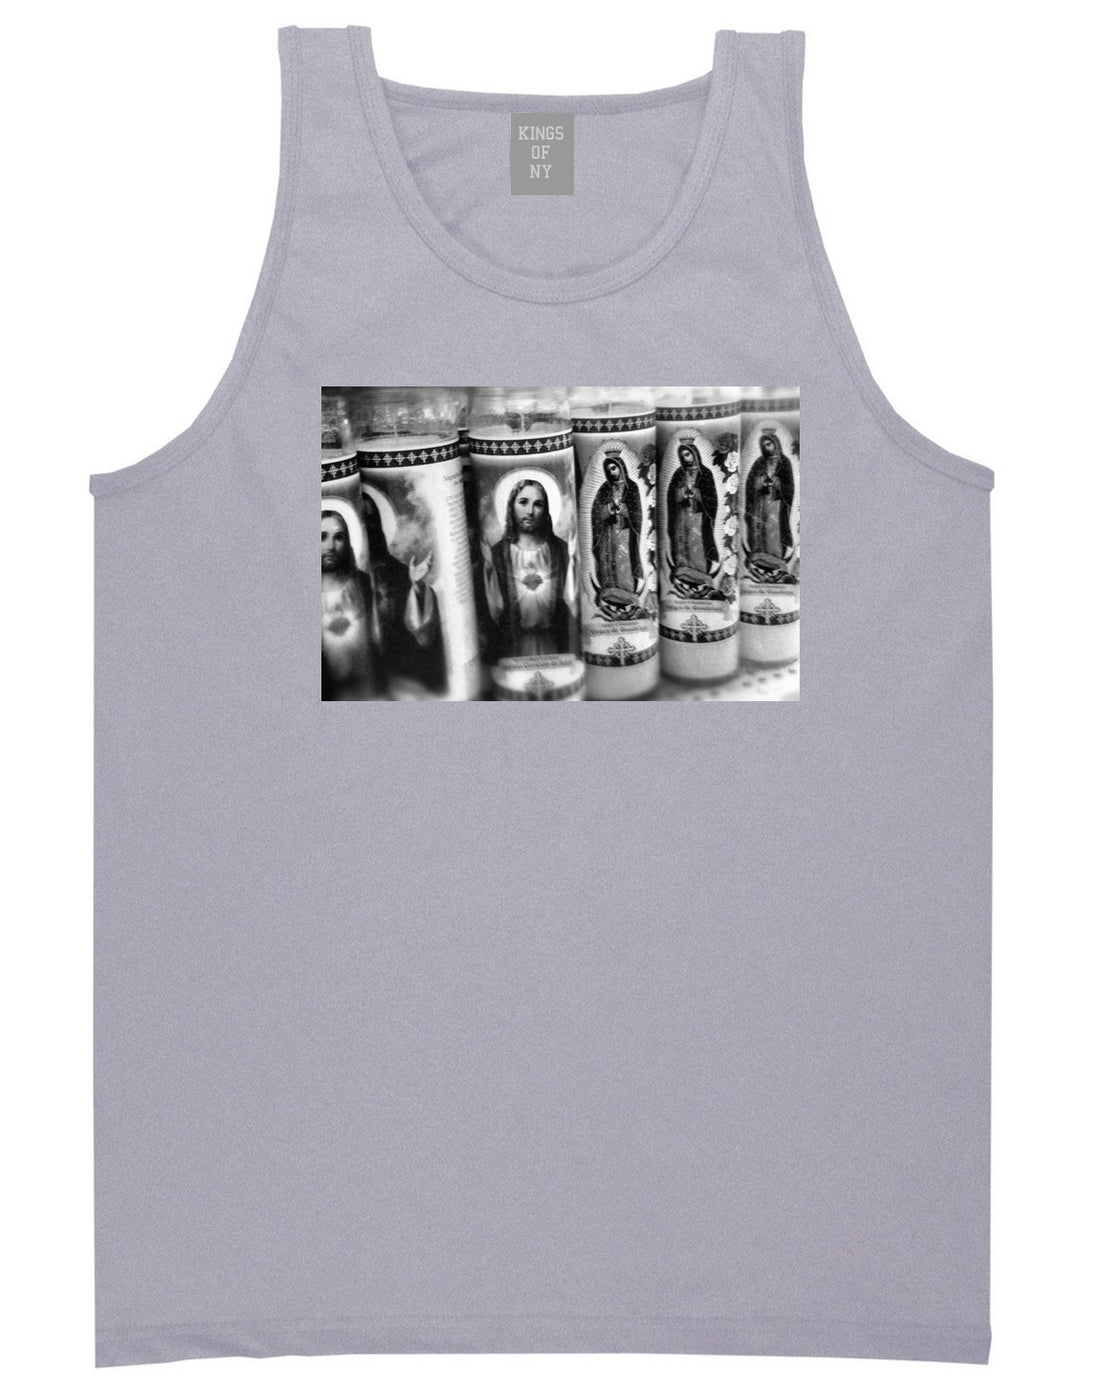 Candles Religious God Jesus Mary Fire NYC Tank Top In Grey by Kings Of NY